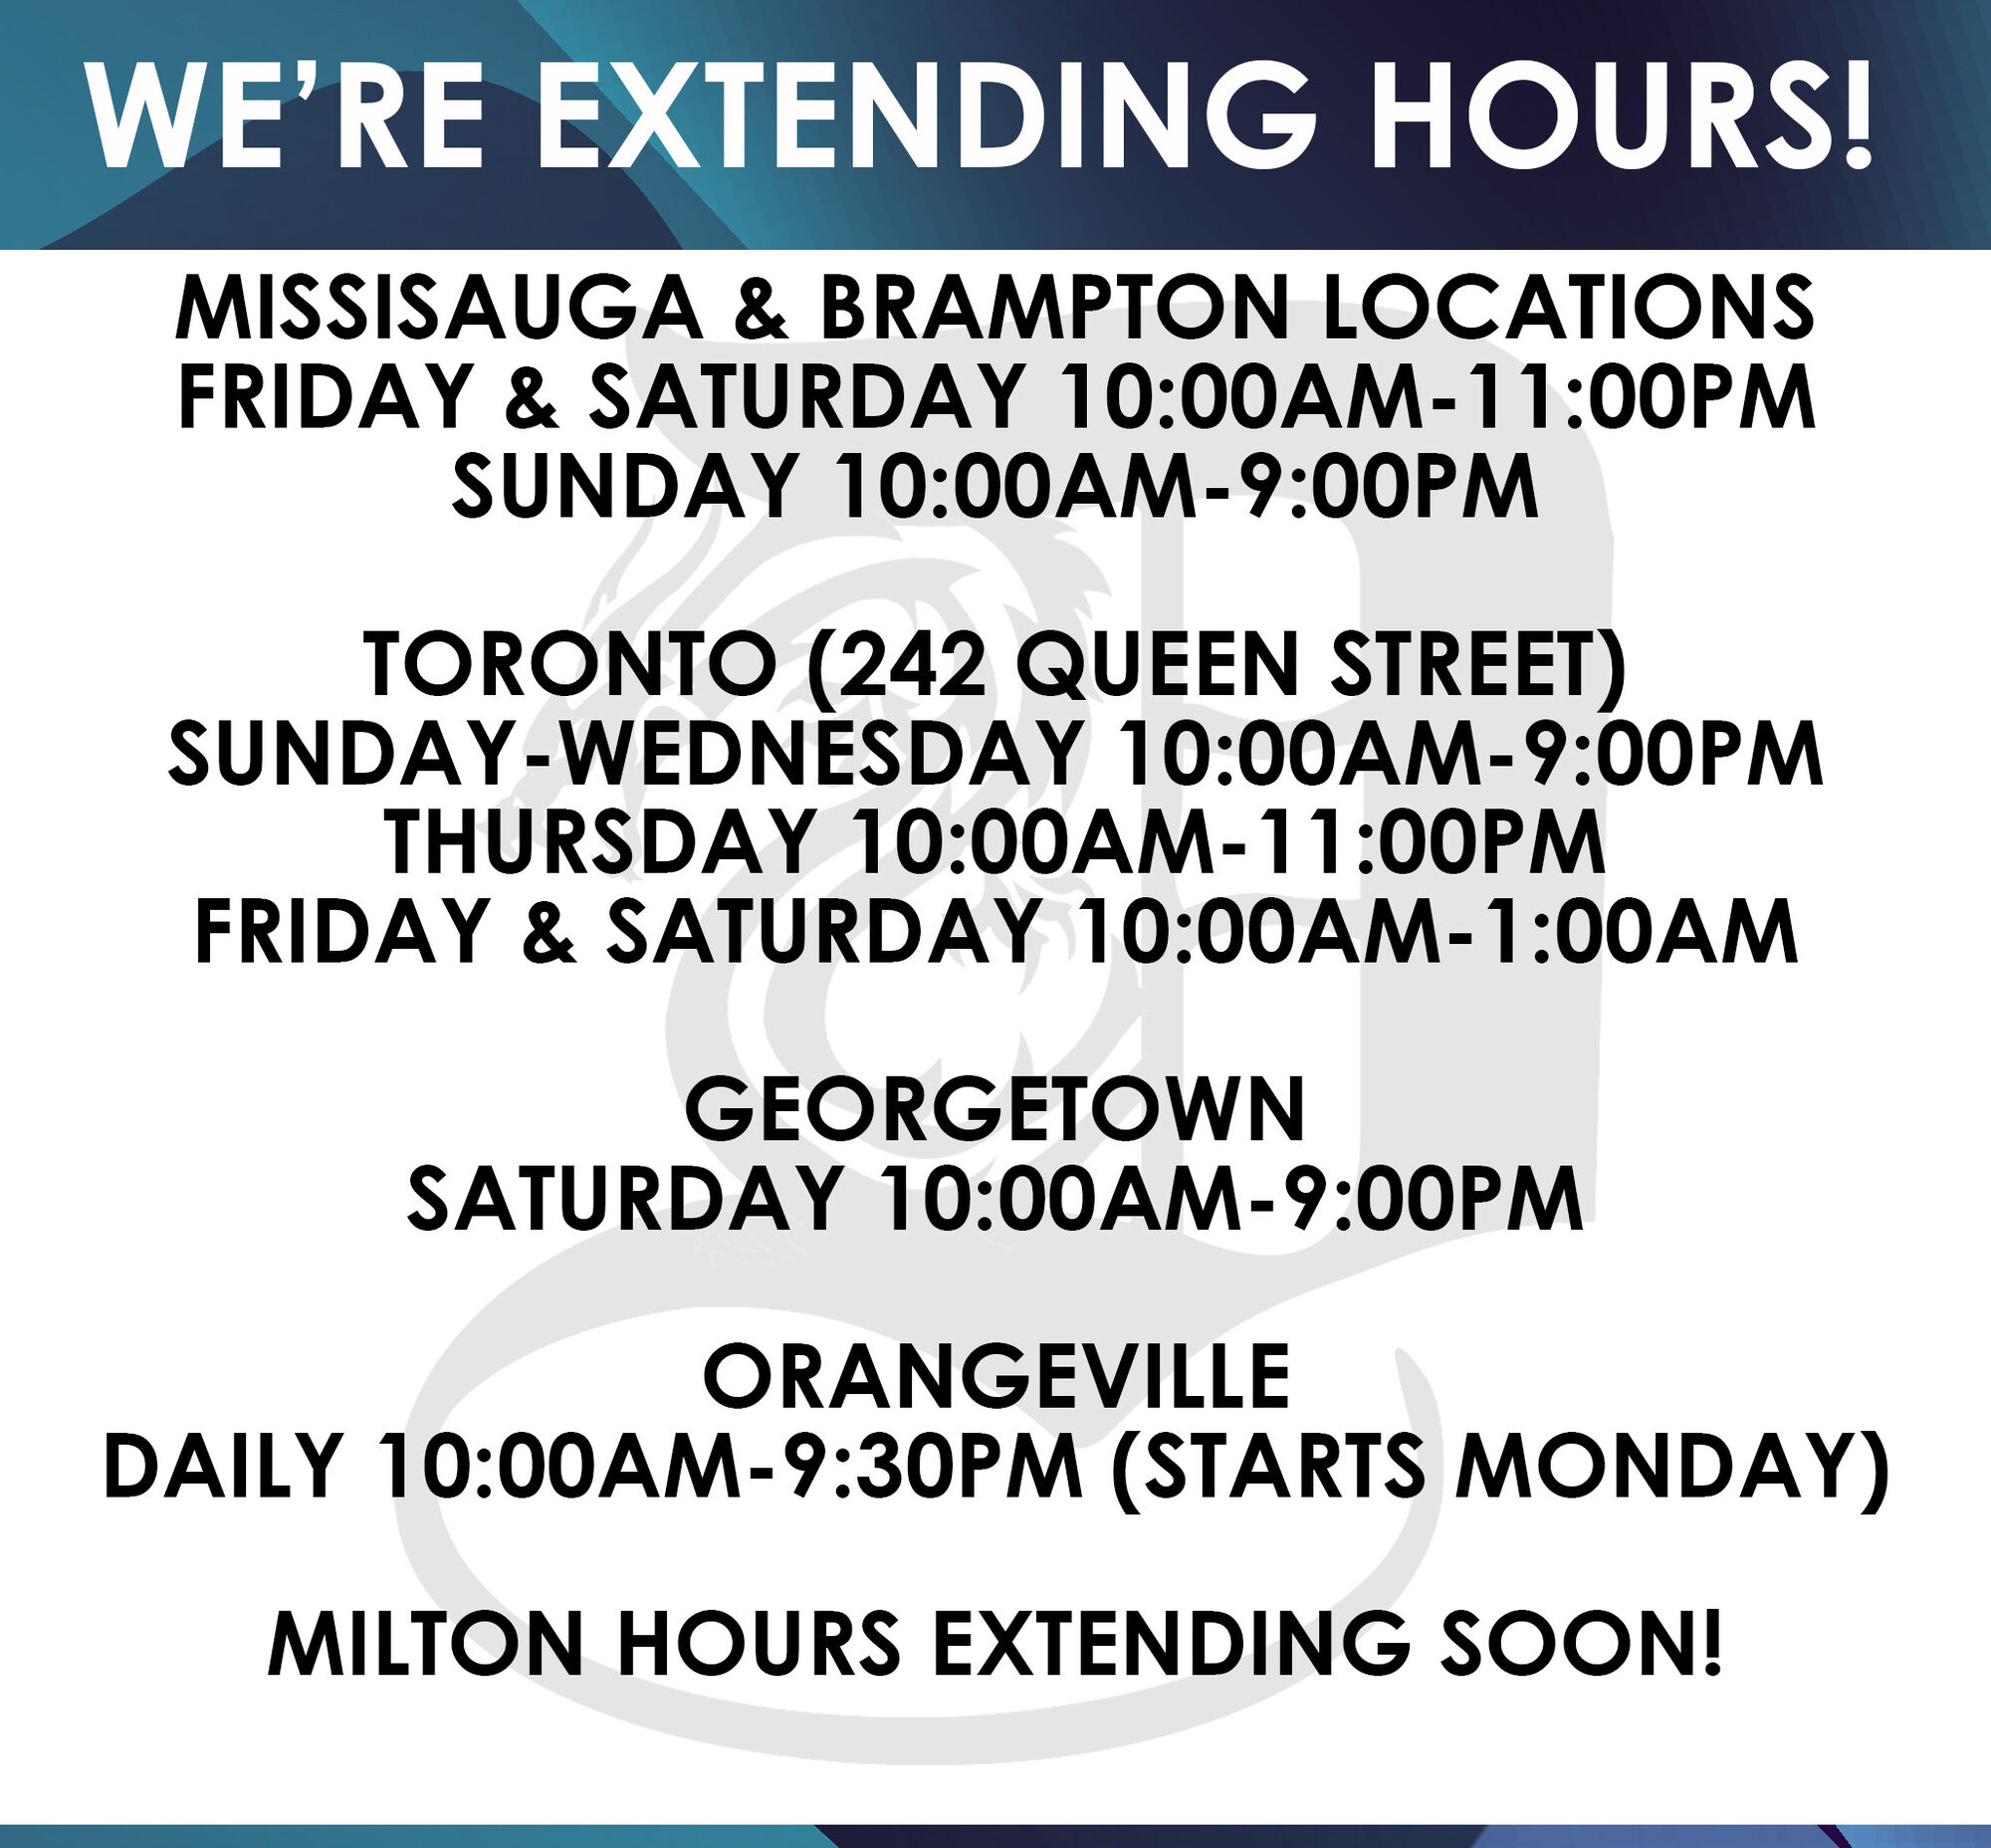 WE'RE EXTENDING HOURS! MISSISAUGA BRAMPTON LOCATIONS FRIDAY SATURDAY 10:00AM-11:00PM SUNDAY 10:00AM-9:00PM TORONTO 242 QUEEN STREET SUNDAY-WEDNESDAY 10:00AM-9:00PM THURSDAY 10:00AM-11:00PM FRIDAY SATURDAY 10:00AM-1:00AM GEORGETOWN SATURDAY 10:00AM-9:00PM ORANGEVILLE DAILY 10:00AM-9:30PM STARTS MONDAY MILTON HOURS EXTENDING SOON! 